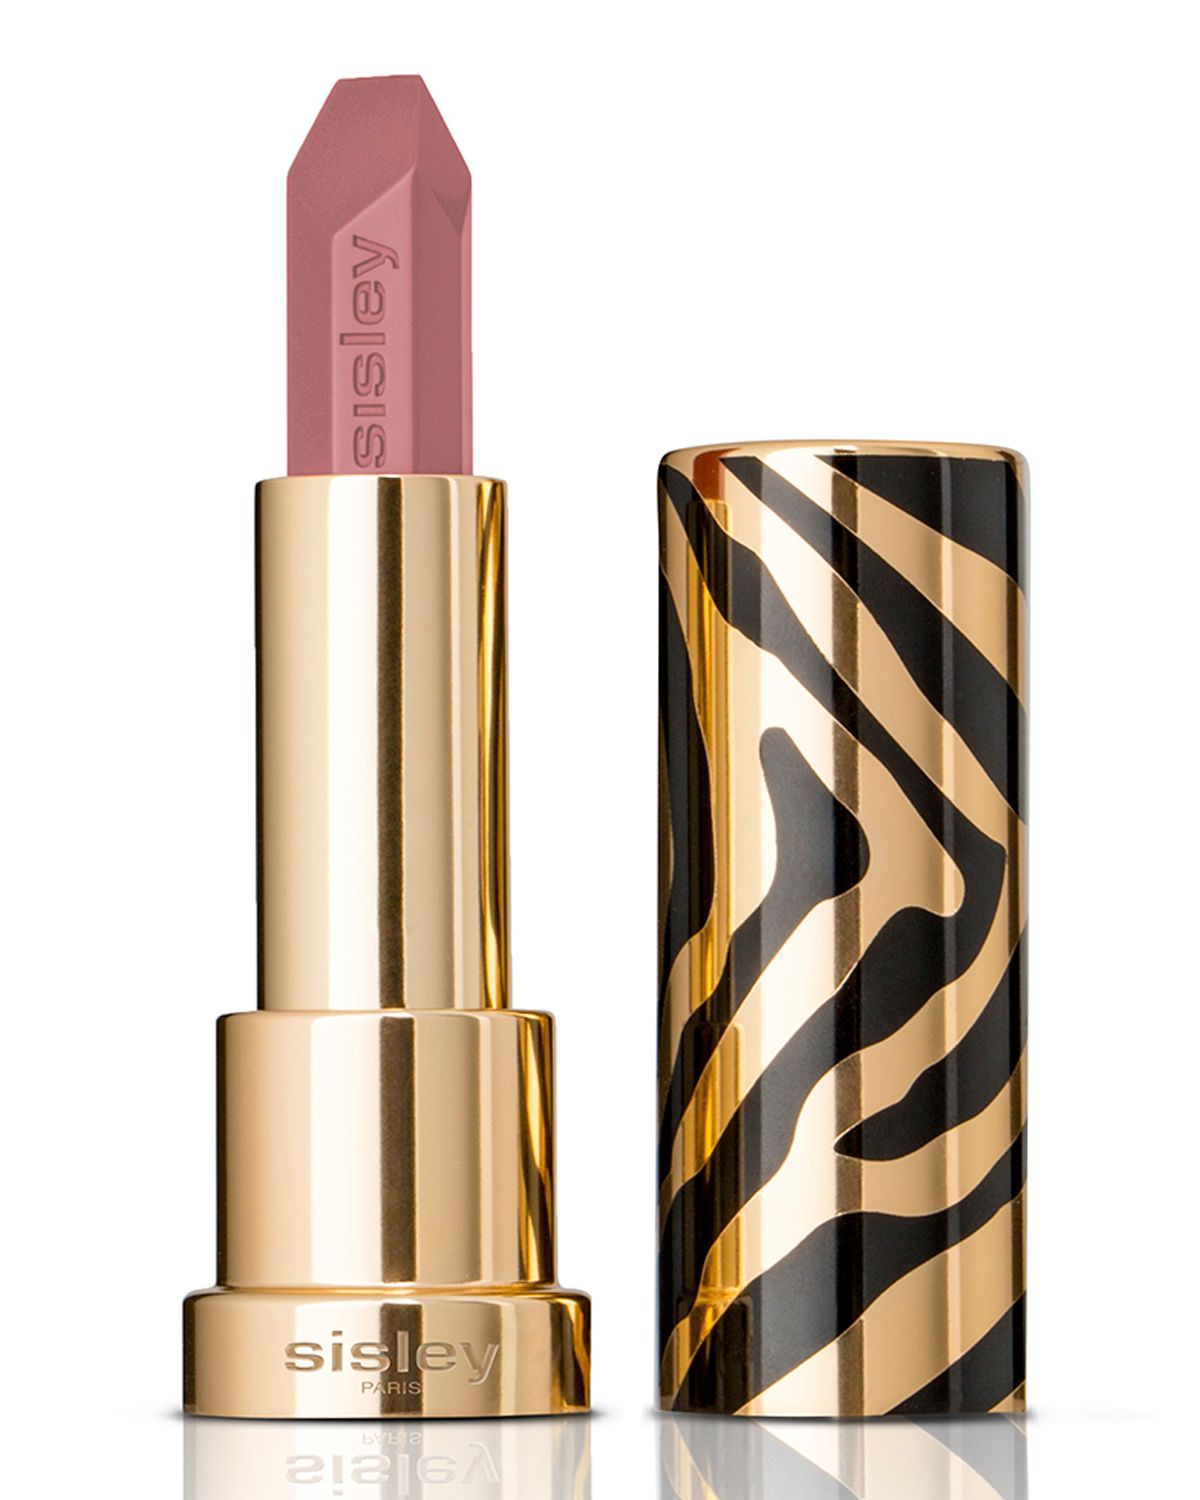 6 new lipsticks that make it hip to be square